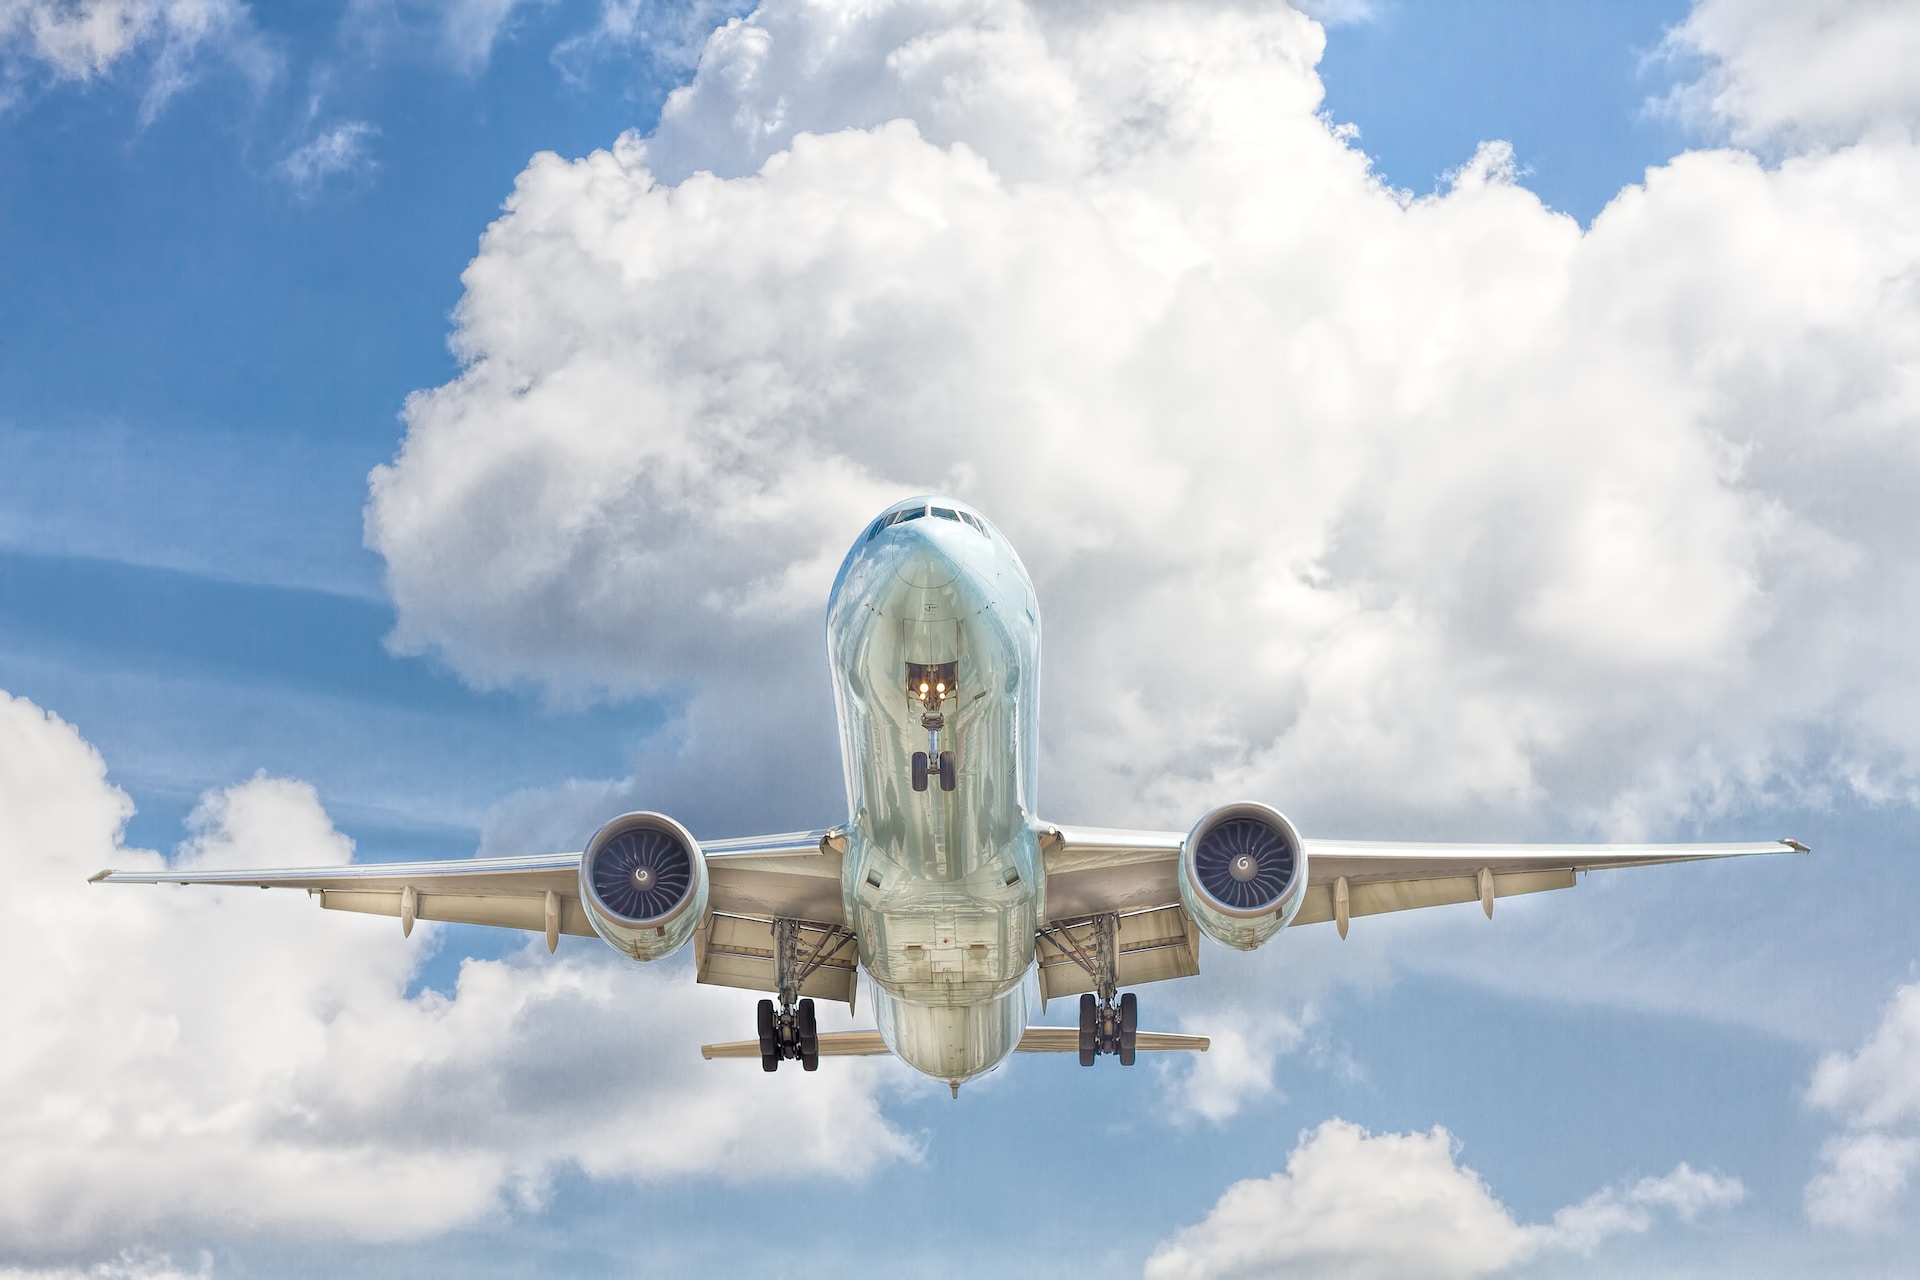 The International Air Transport Association (IATA) and the Aviation Impact Accelerator (AIA) announced a collaboration to speed up the transition to net zero.